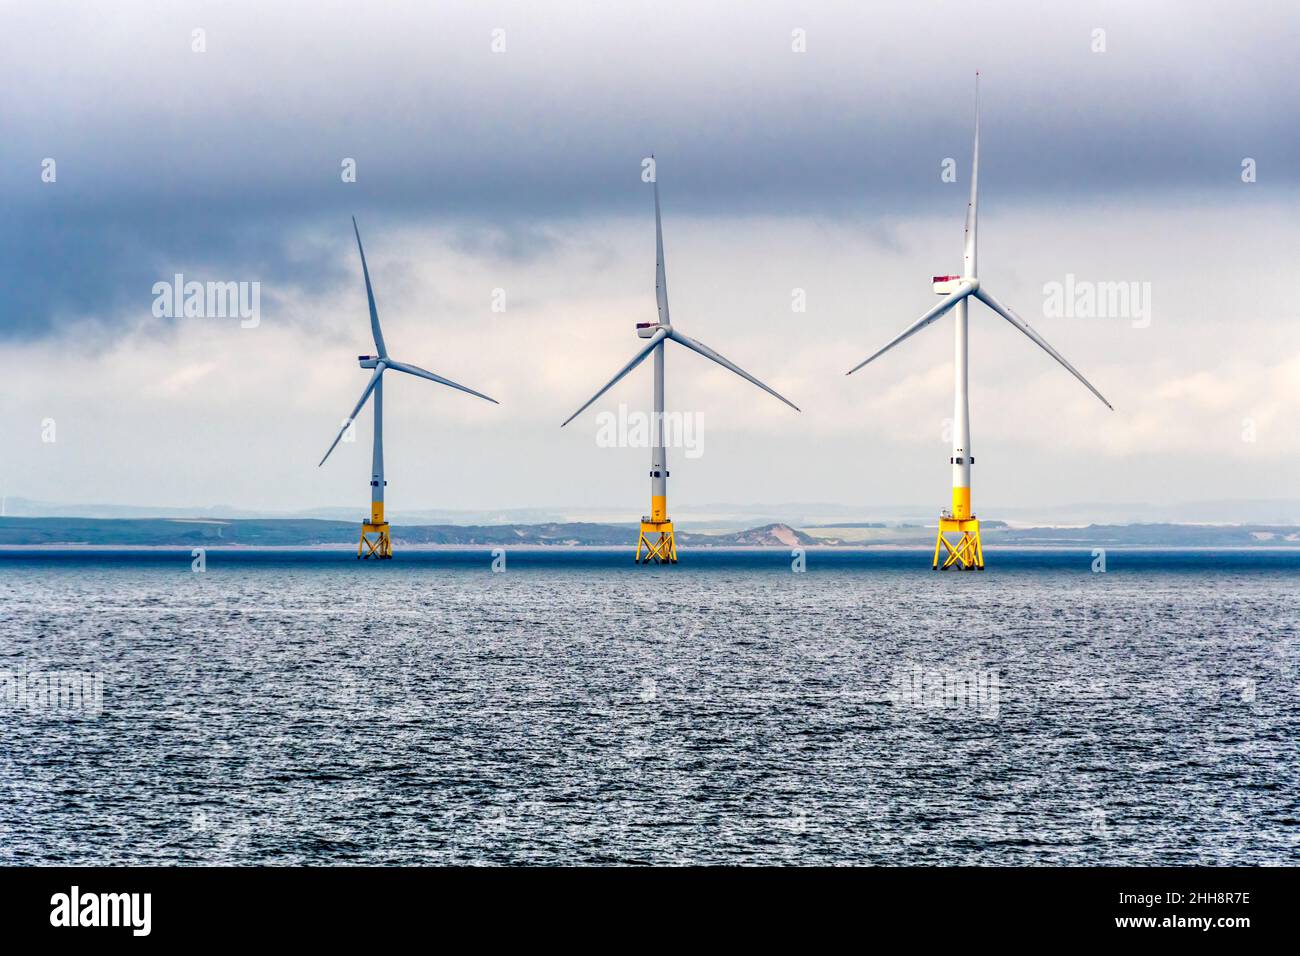 European Offshore Wind Deployment Centre or Aberdeen Offshore Wind Farm is offshore wind test & demonstration facility off Scottish coast at Aberdeen. Stock Photo